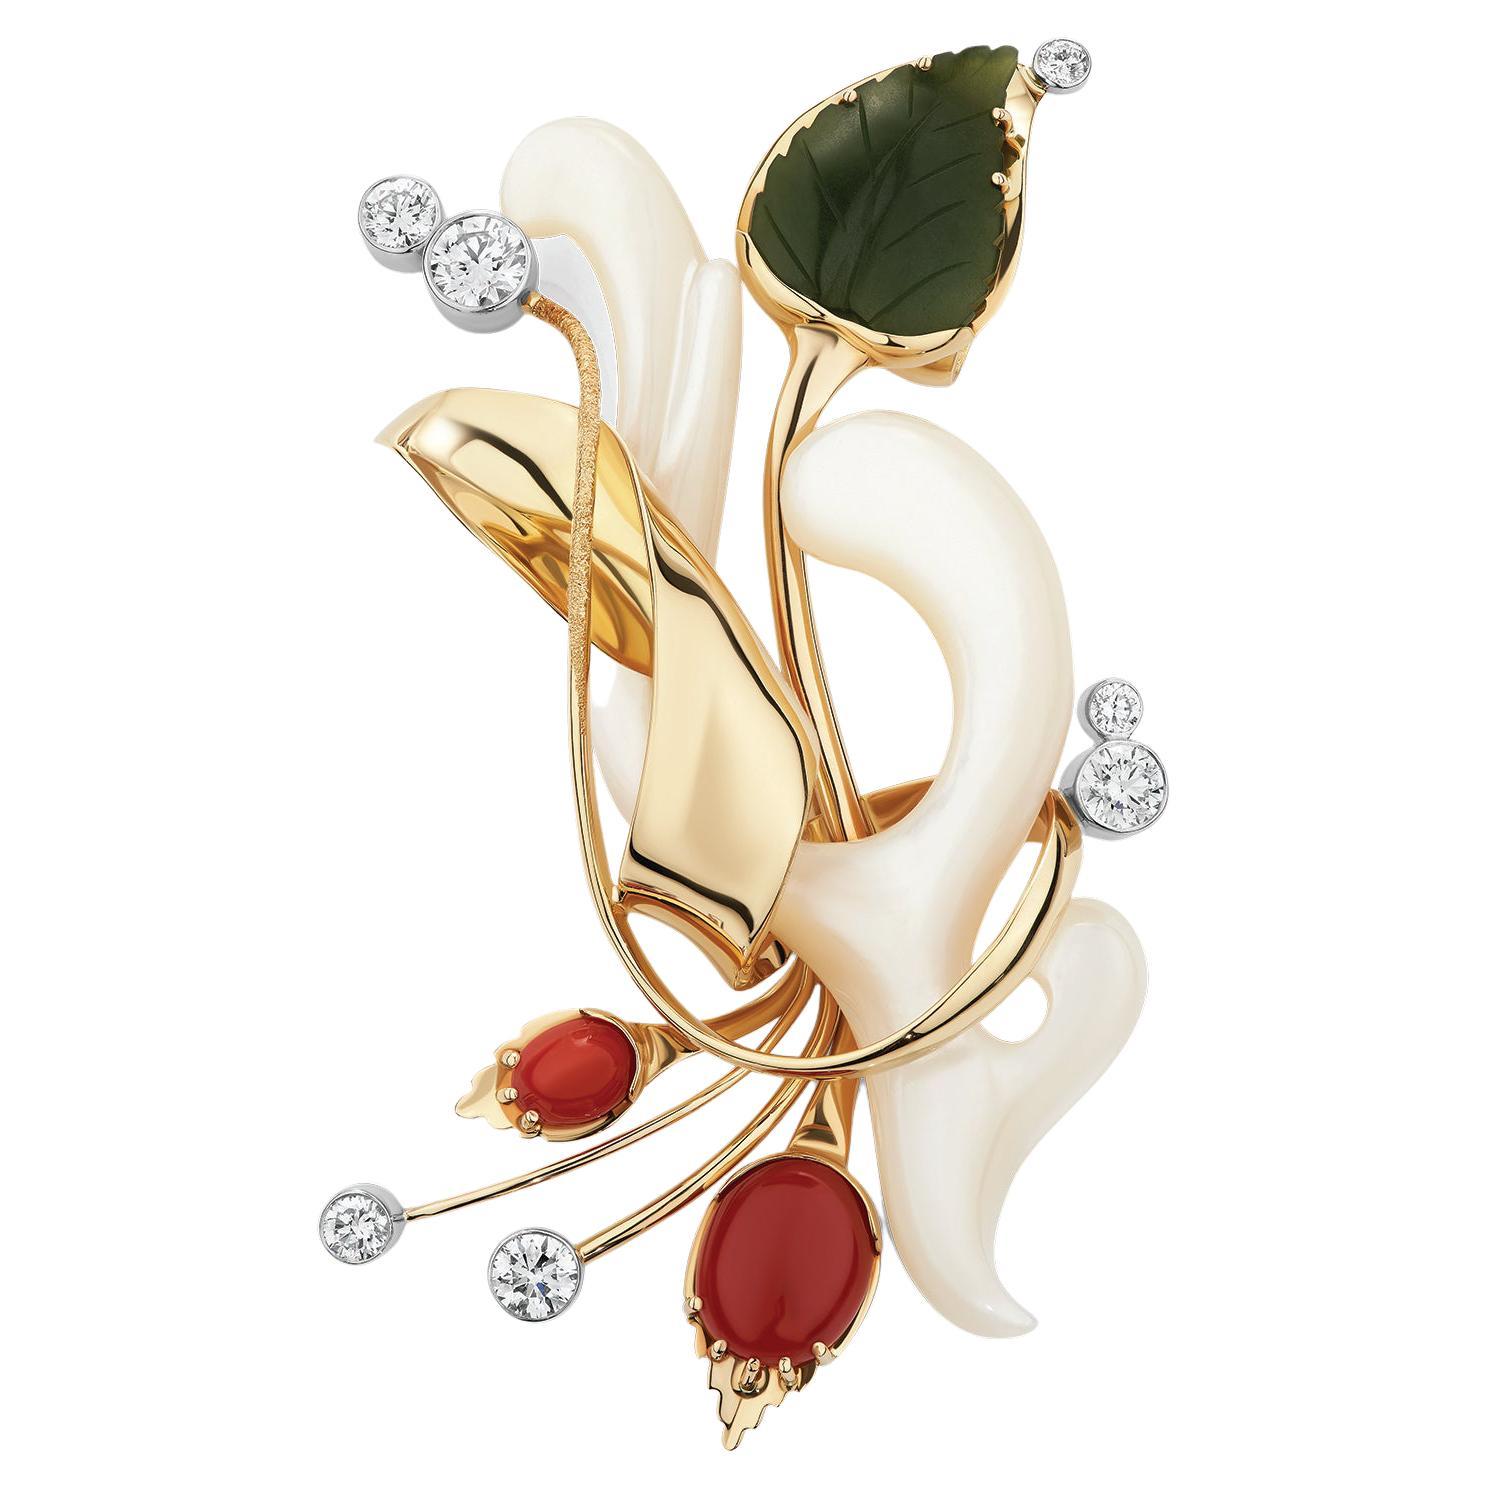 Paul Amey hand crafted 18K, Jade, Natural Red Coral and Diamond "Leaf" Pendant For Sale